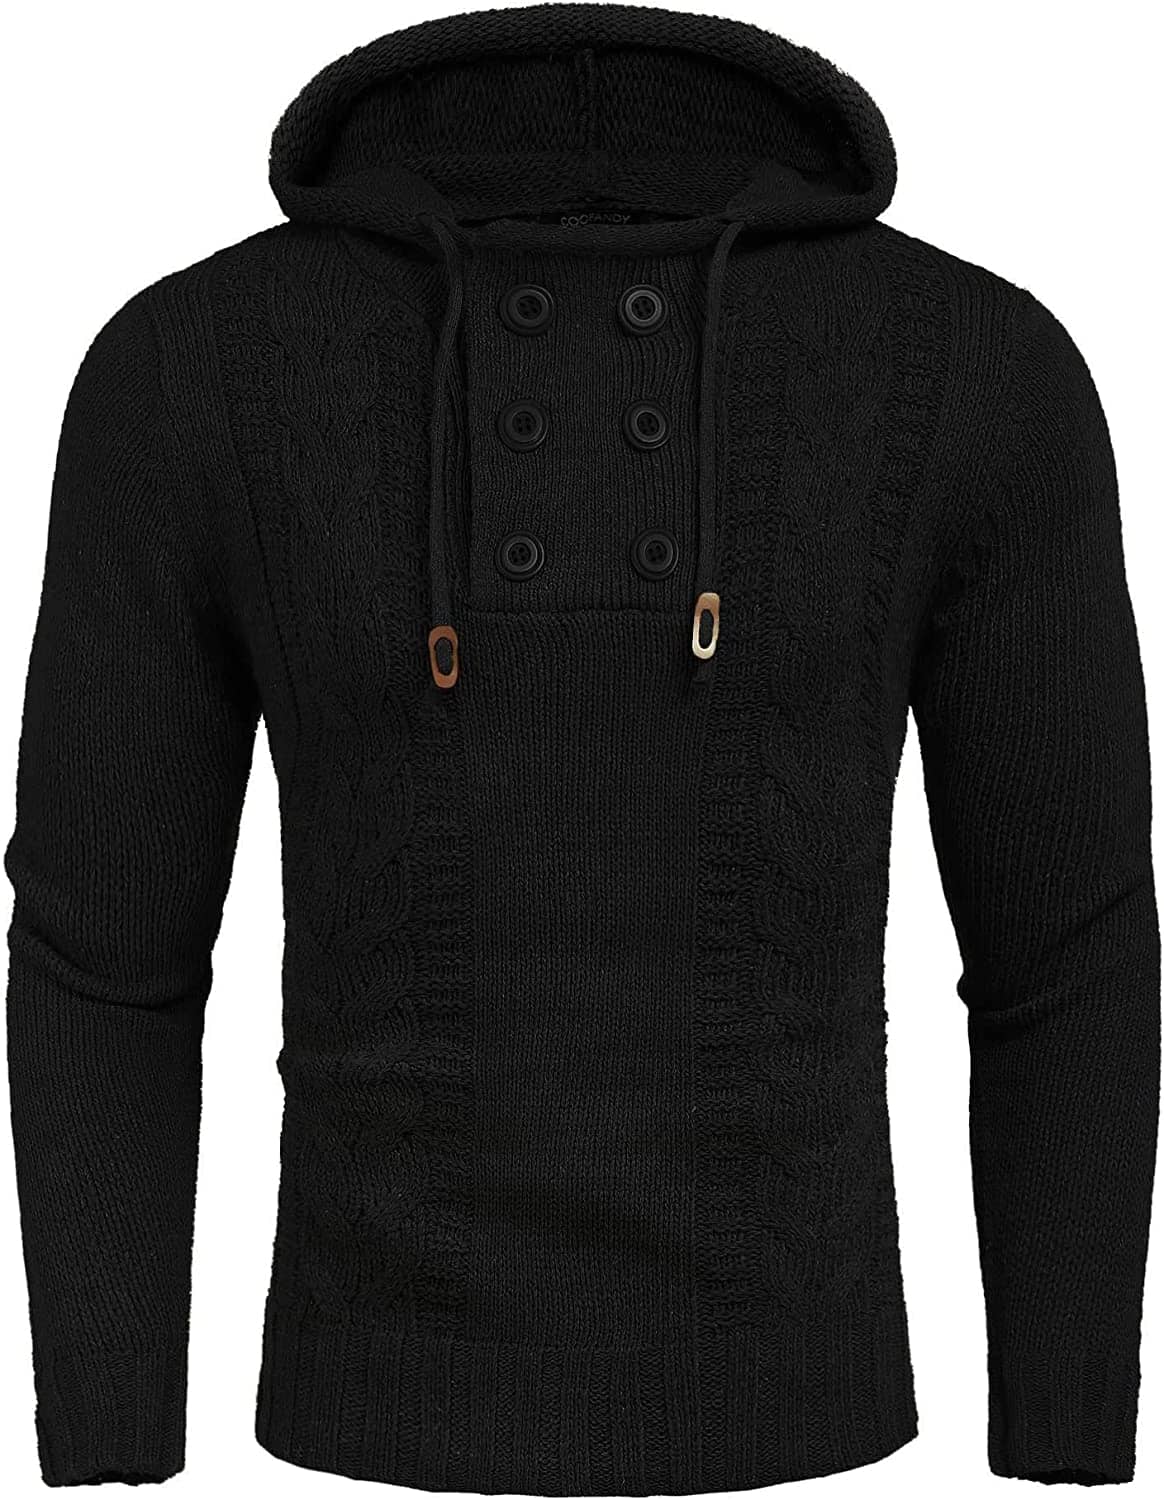 Casual Pullover Knitted Hoodies (US Only) Hoodies COOFANDY Store Pure Black M 